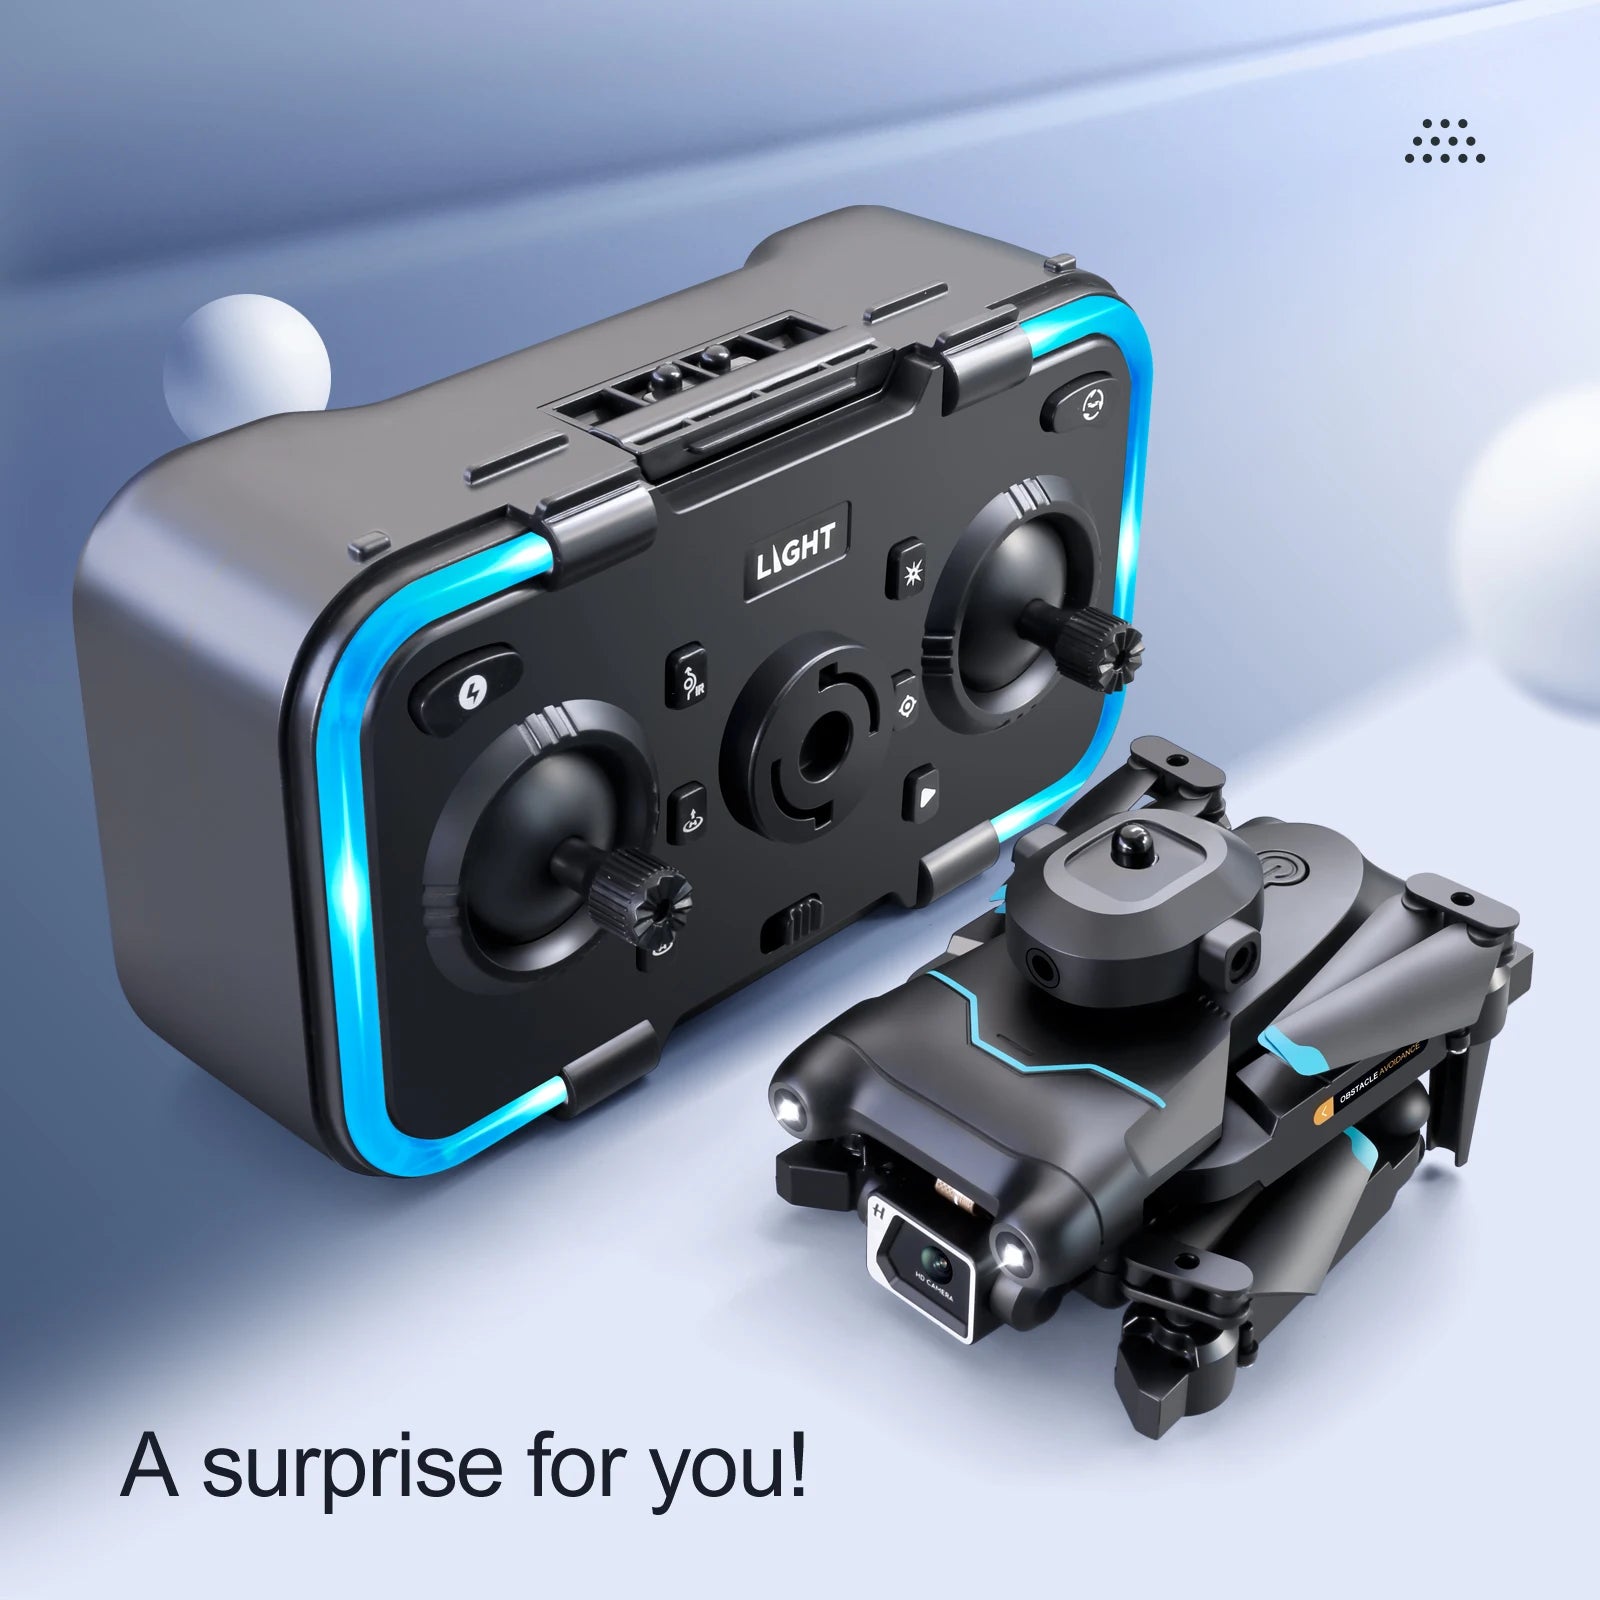 S96 Mini Drone, definitely a great birthday/christmas/holiday gift for